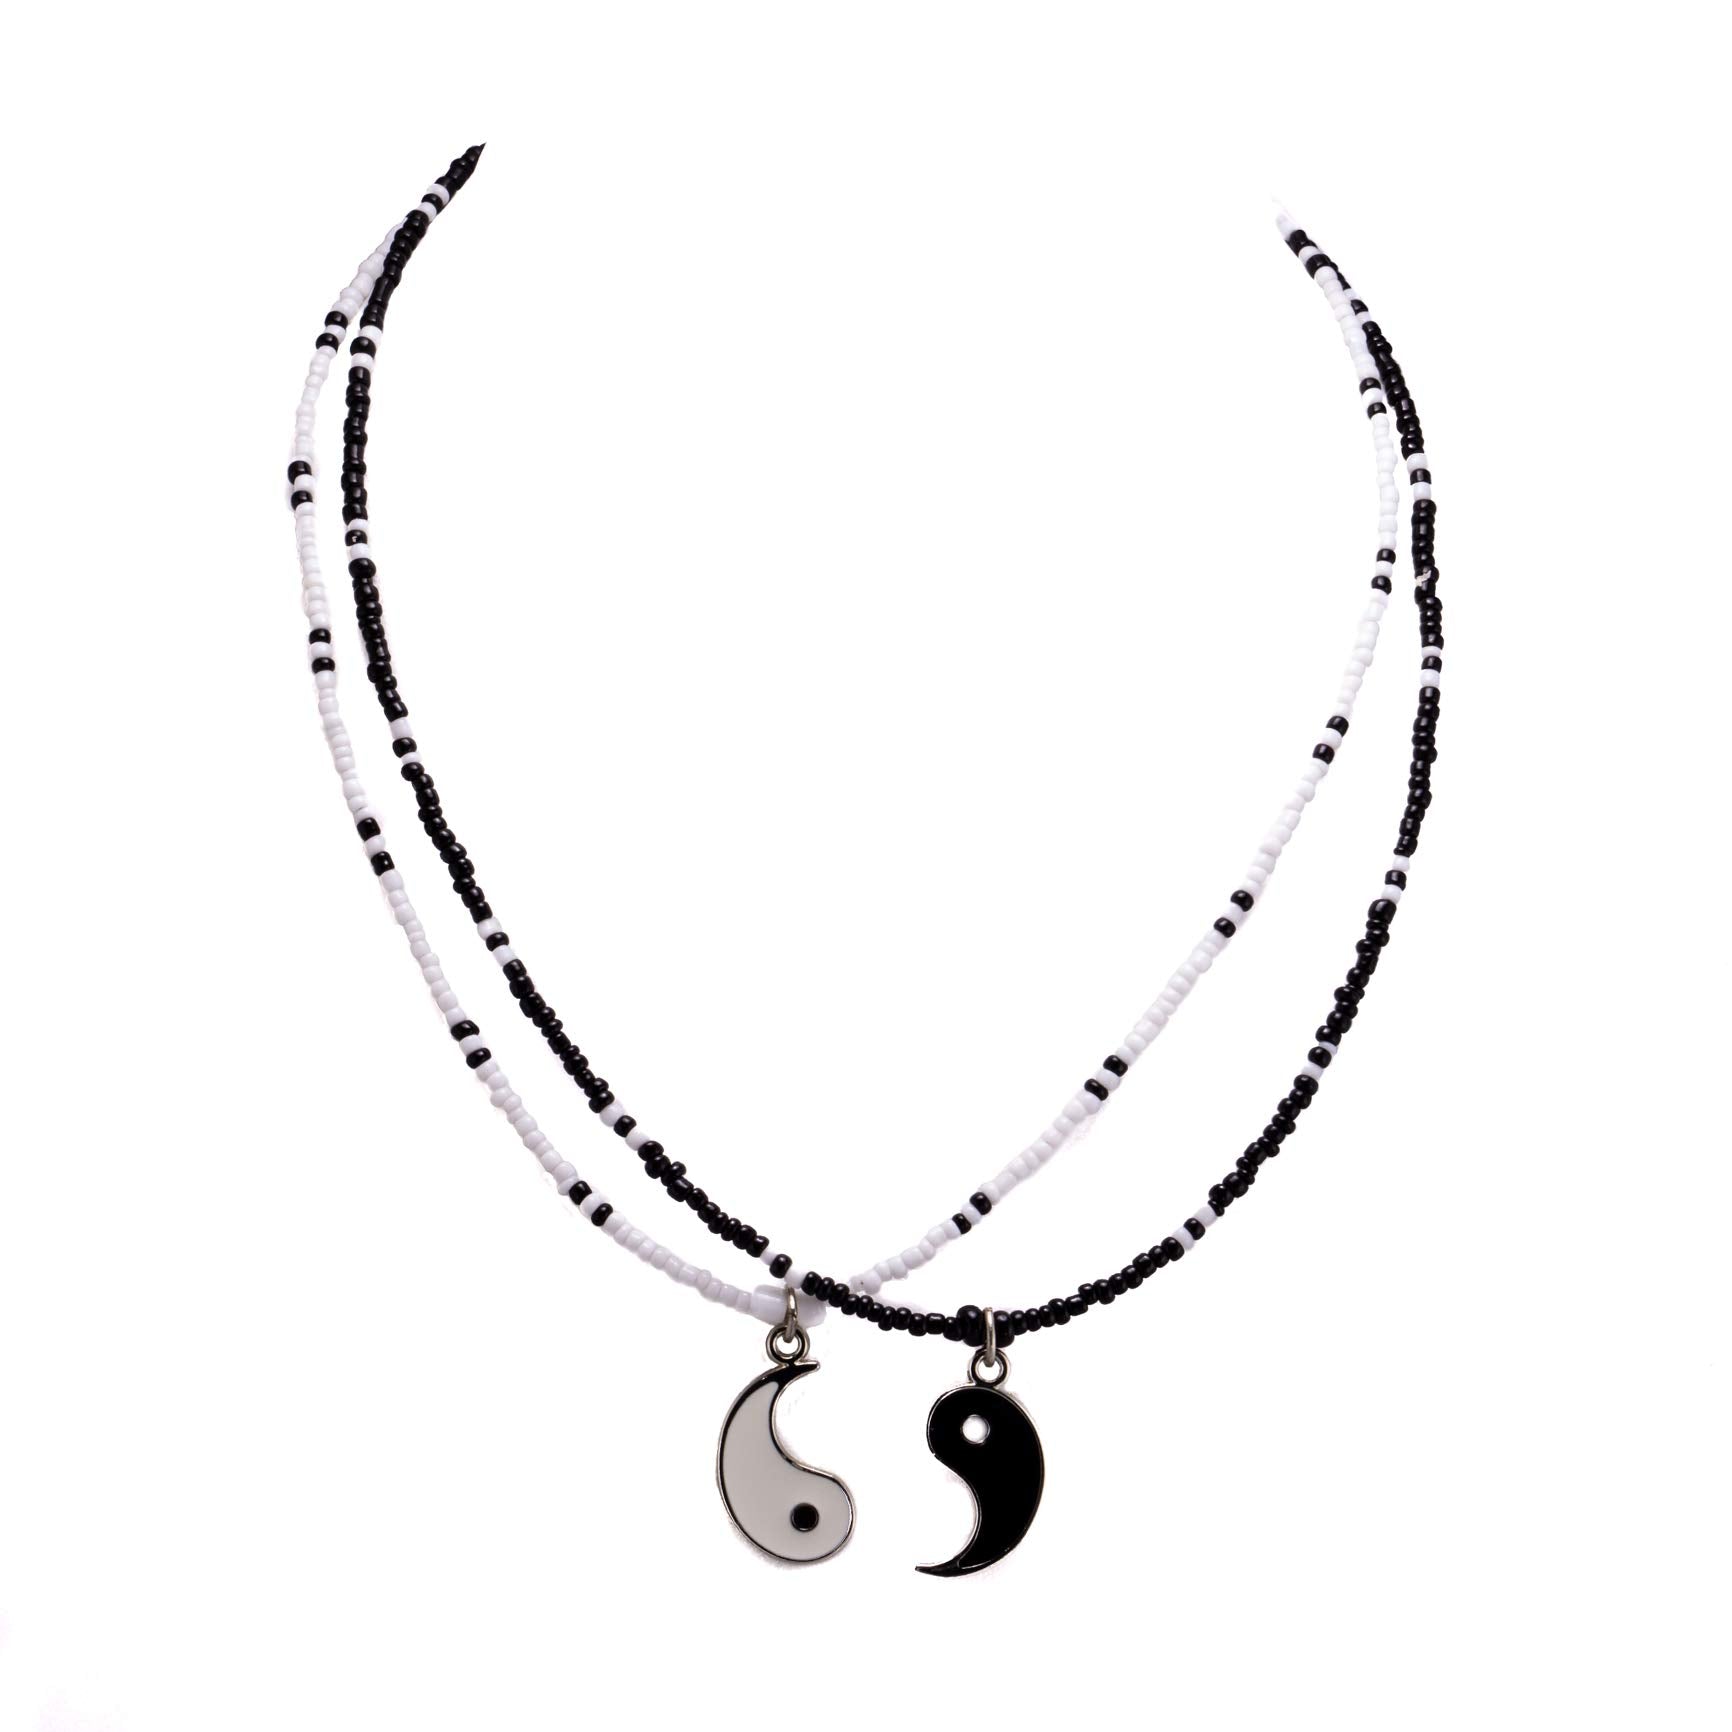 Yin and Yang Pendants on Seed Beads Necklaces Set